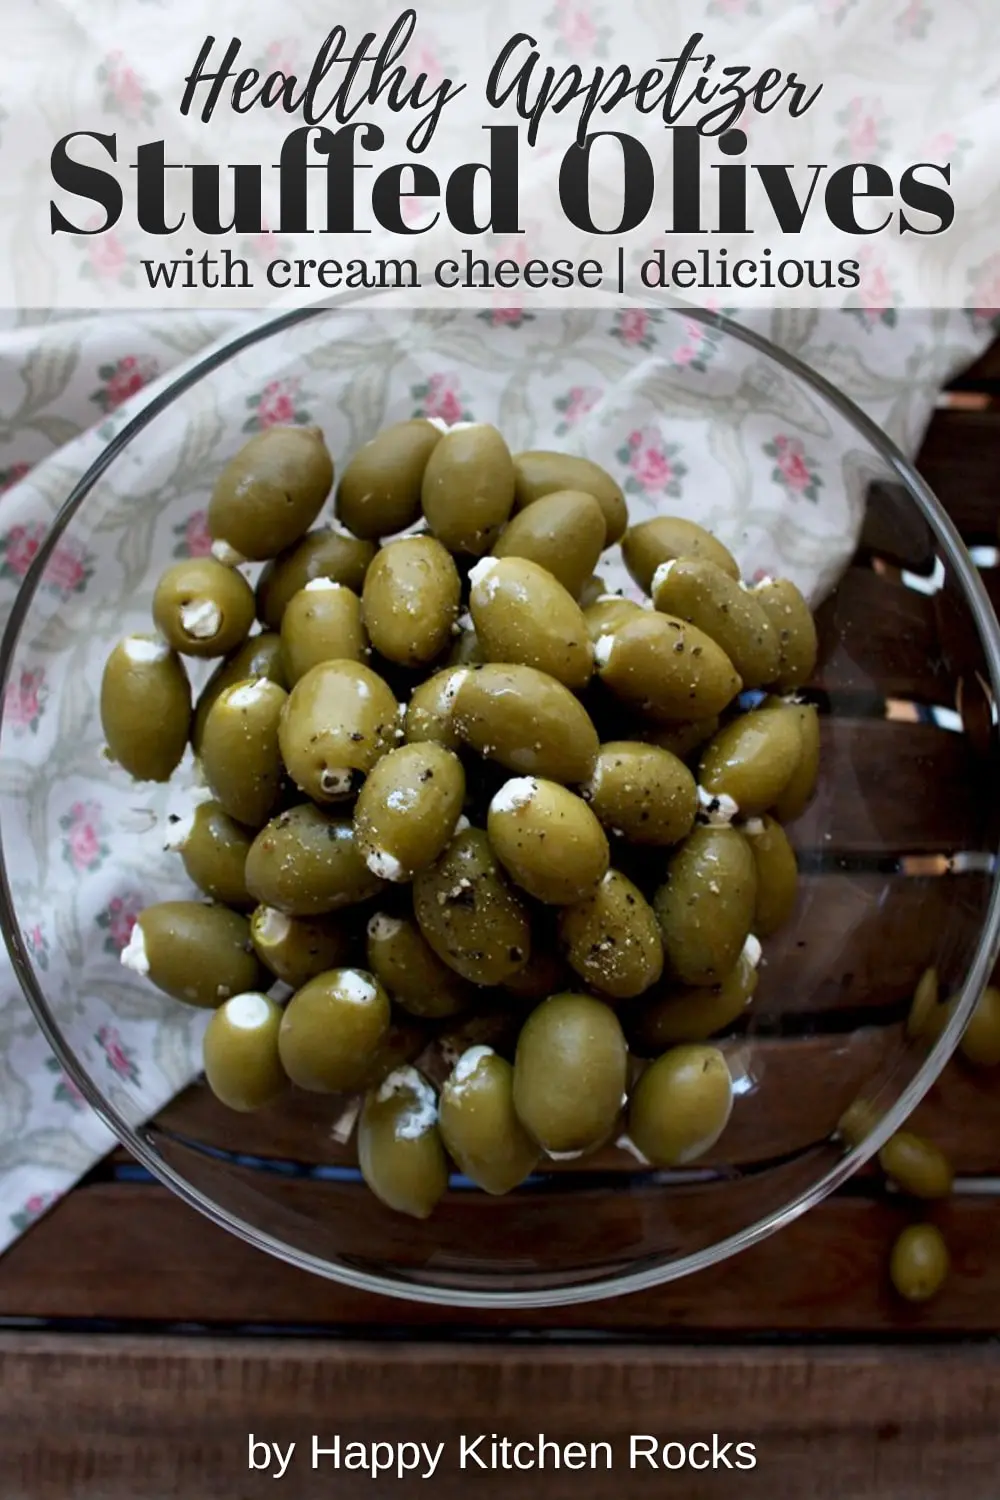 Cream Cheese Stuffed Olives Collage with Text Overlay